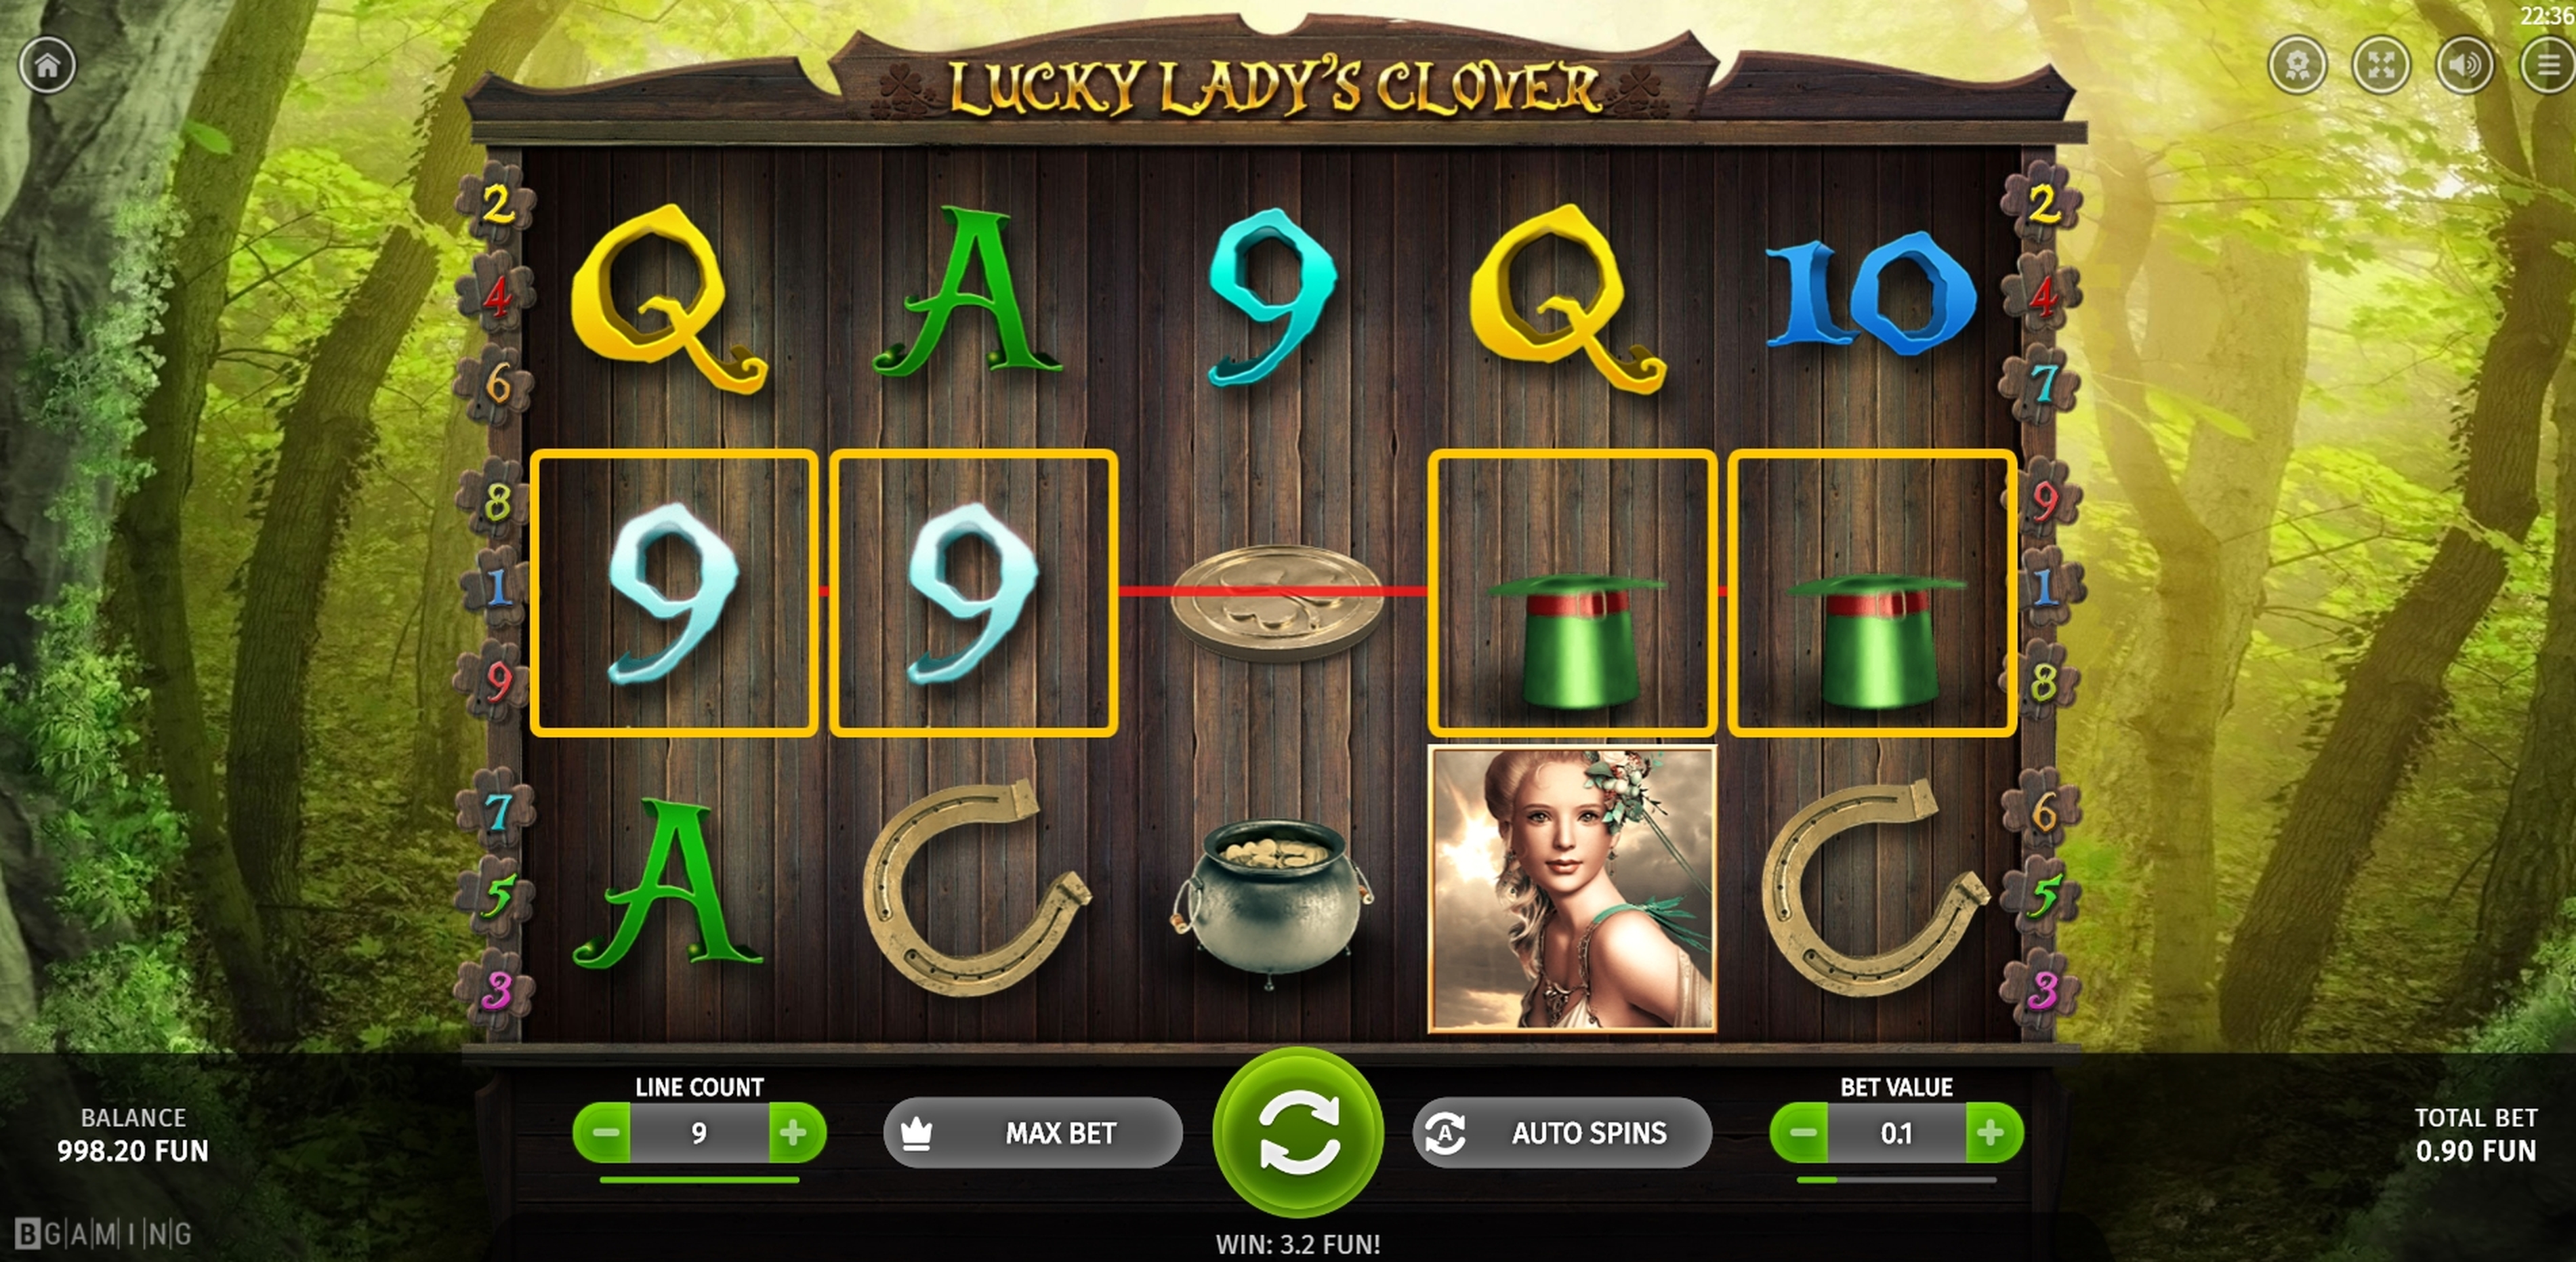 Win Money in Lucky Lady's Clover Free Slot Game by BGAMING